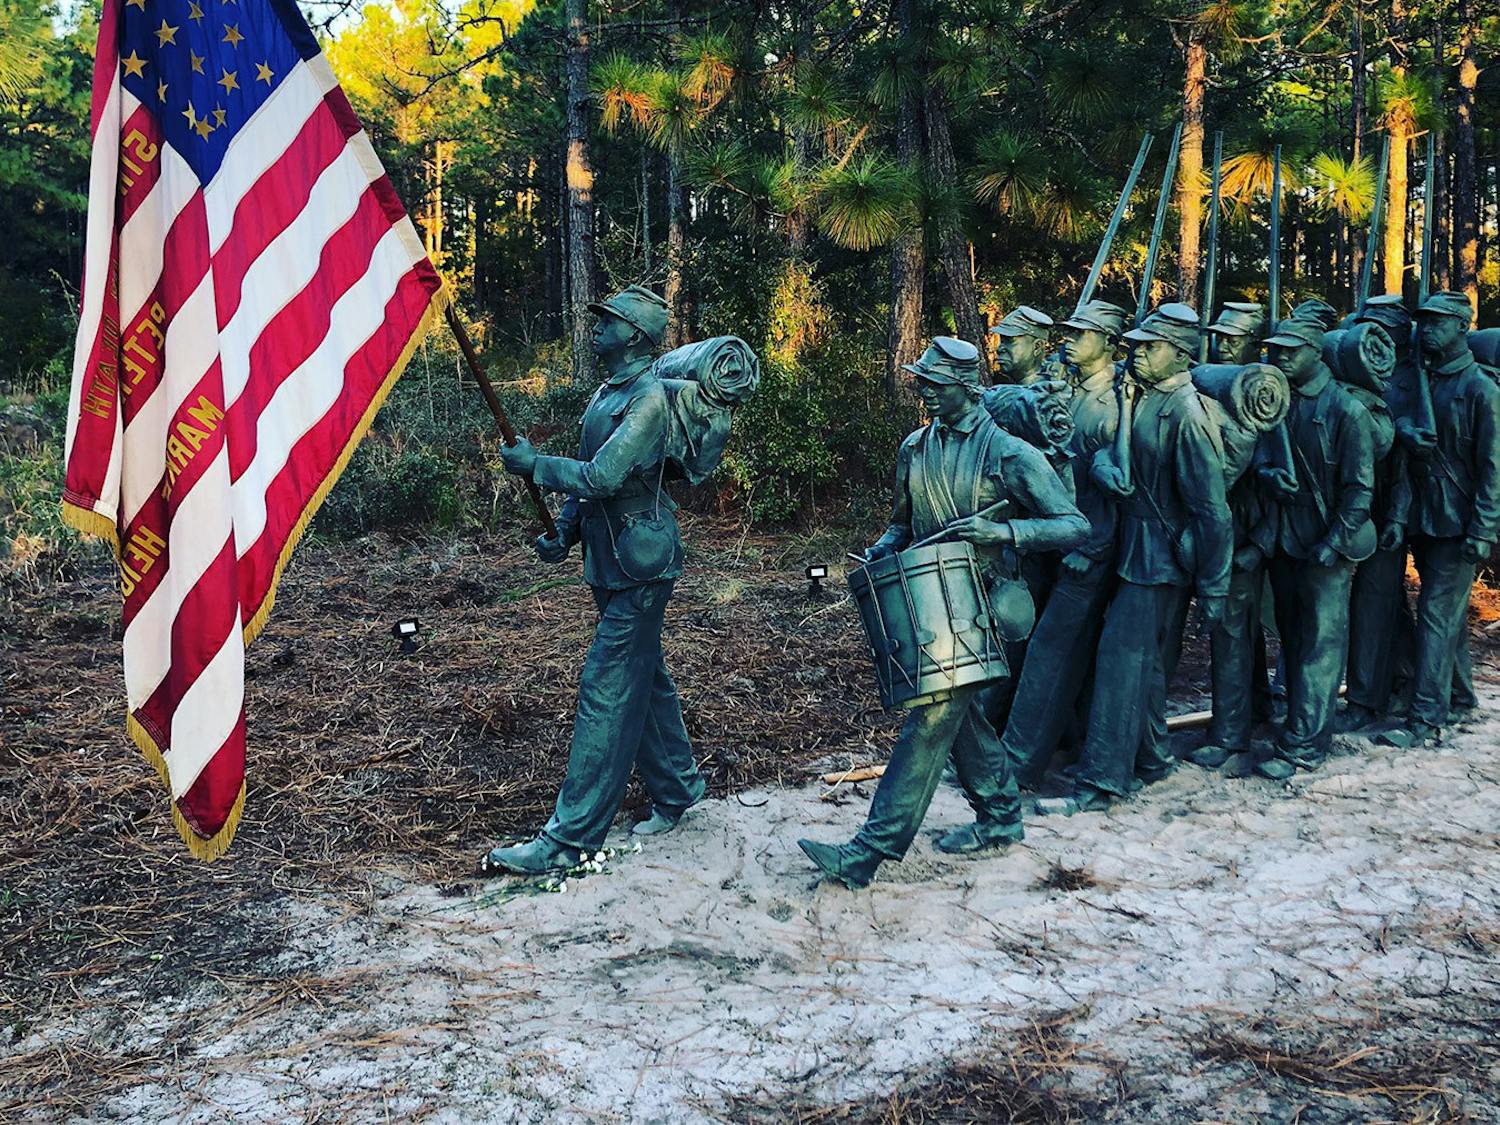 Stephen L. Hayes' new sculpture "Boundless" honors soldiers from the United States Colored Troops.